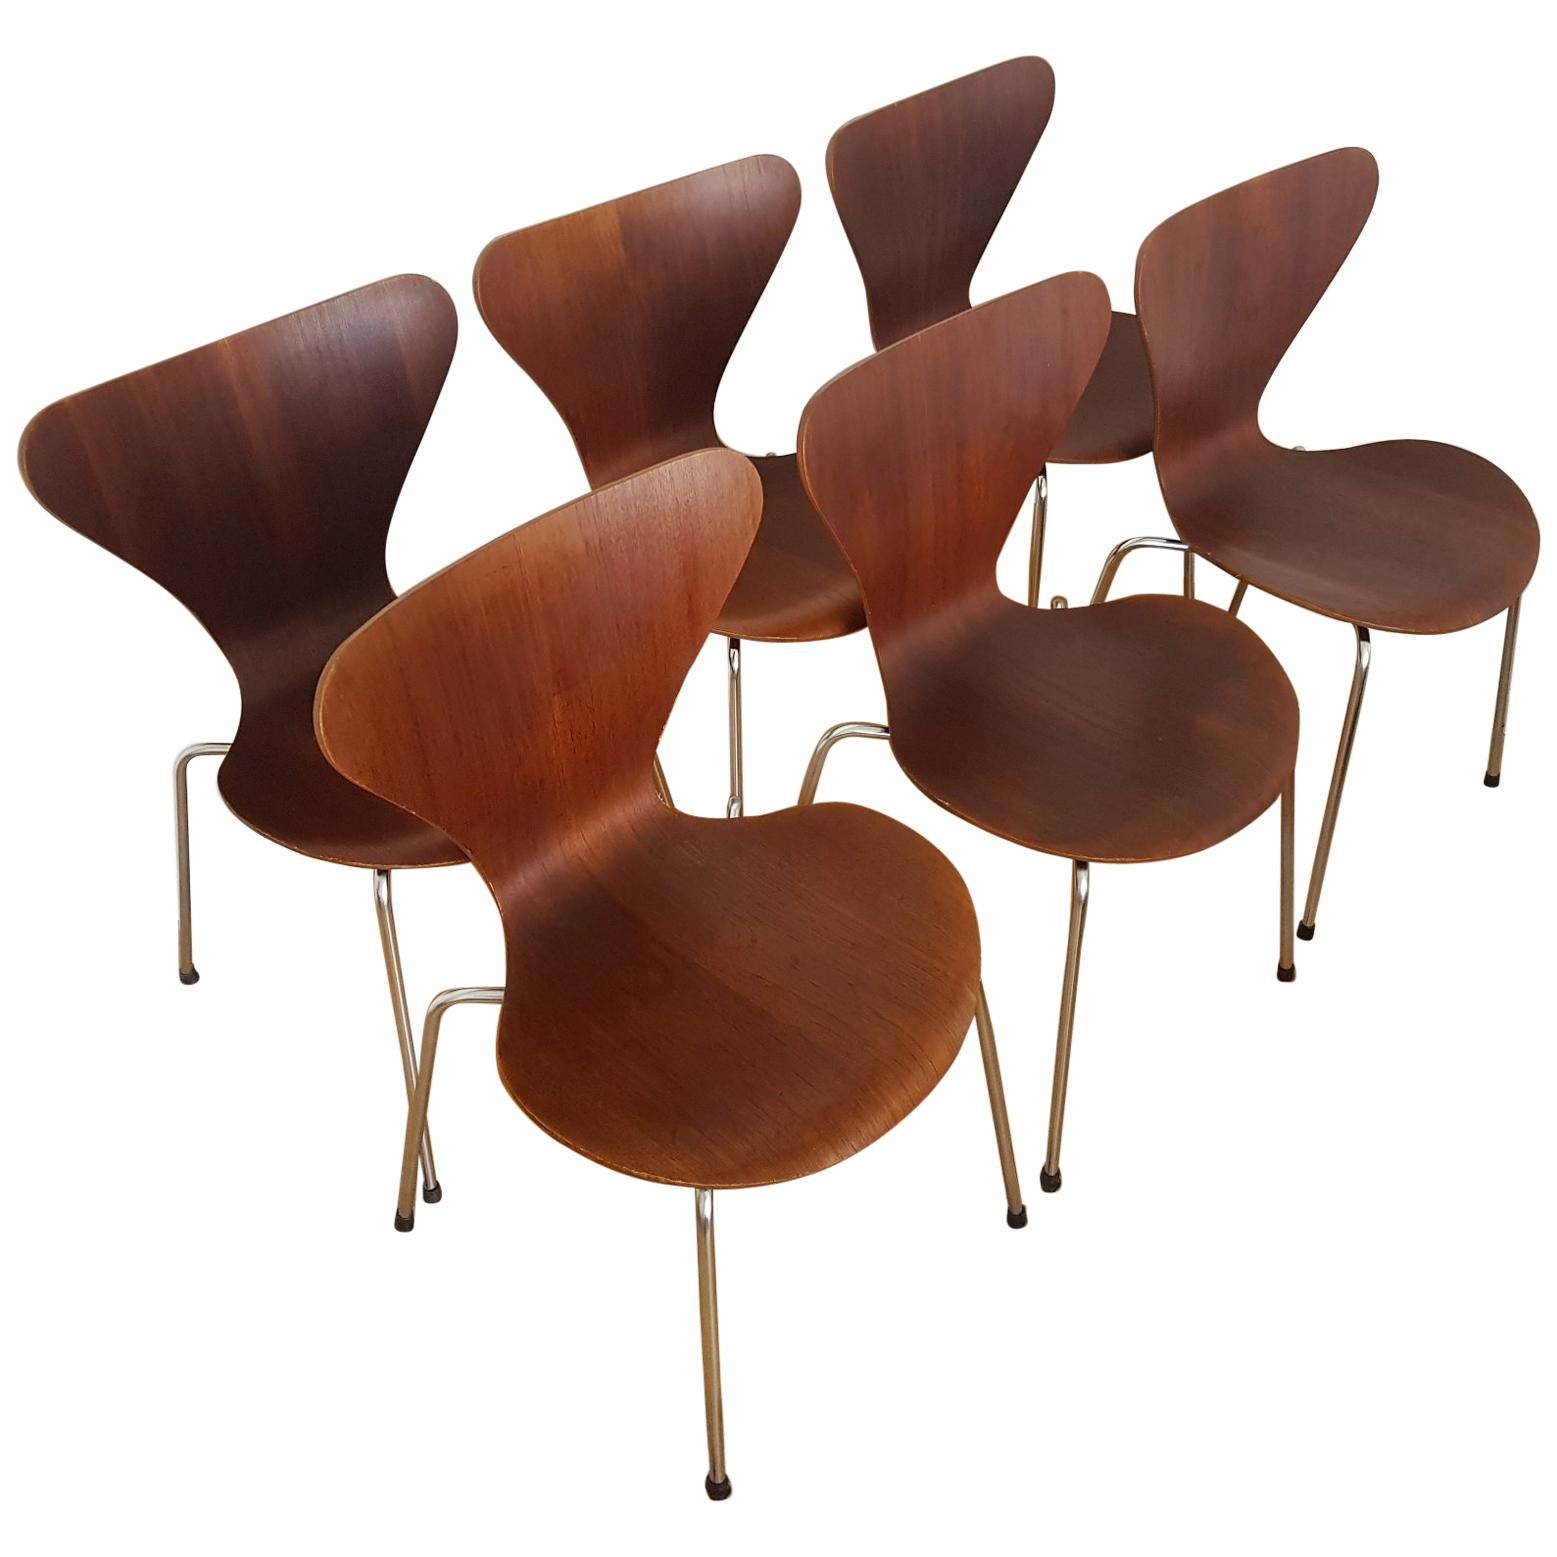 6 Vintage Series 7 Chairs 3107 in Teak 1960s by Arne Jacobsen for Fritz Hansen For Sale